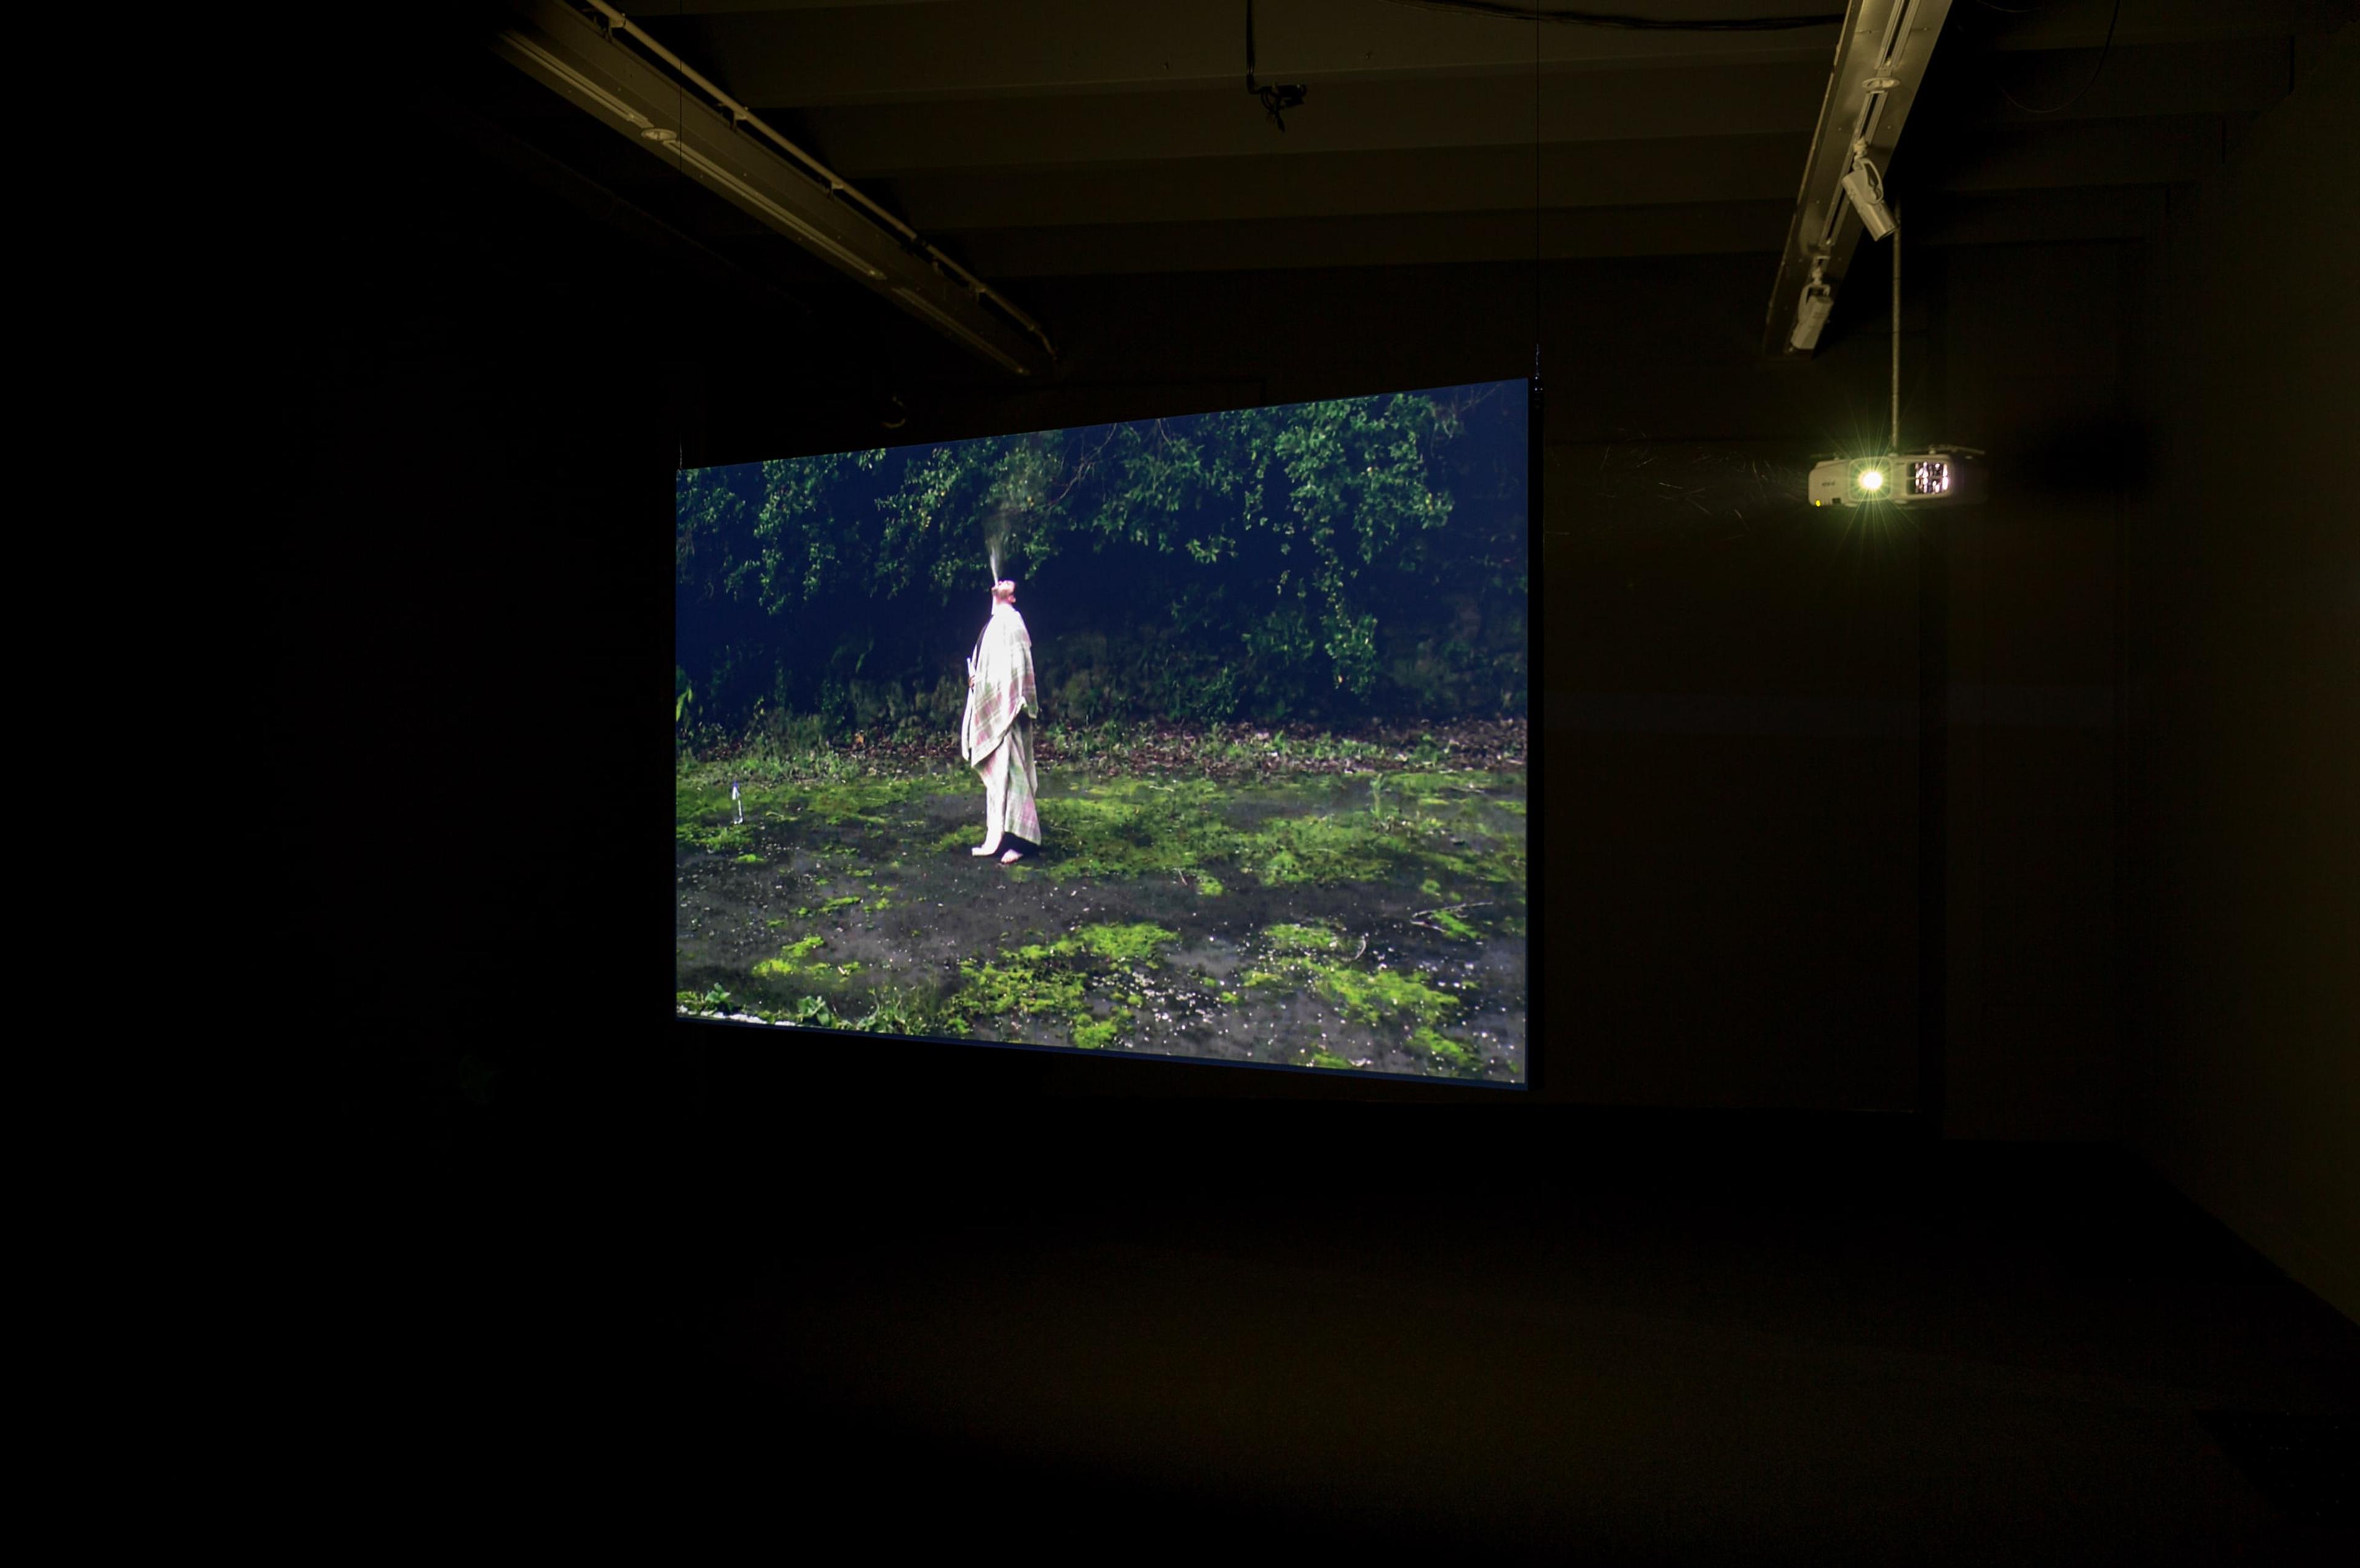 Installation view at the Adam Art Gallery, Shannon Te Ao,Follow the Party of the Whale, , 2013, two-channel video, sound, colour, 12:51mins, 2:49mins (cinematography by Iain Frengley) © Shannon Te Ao (photo: Shaun Waugh)